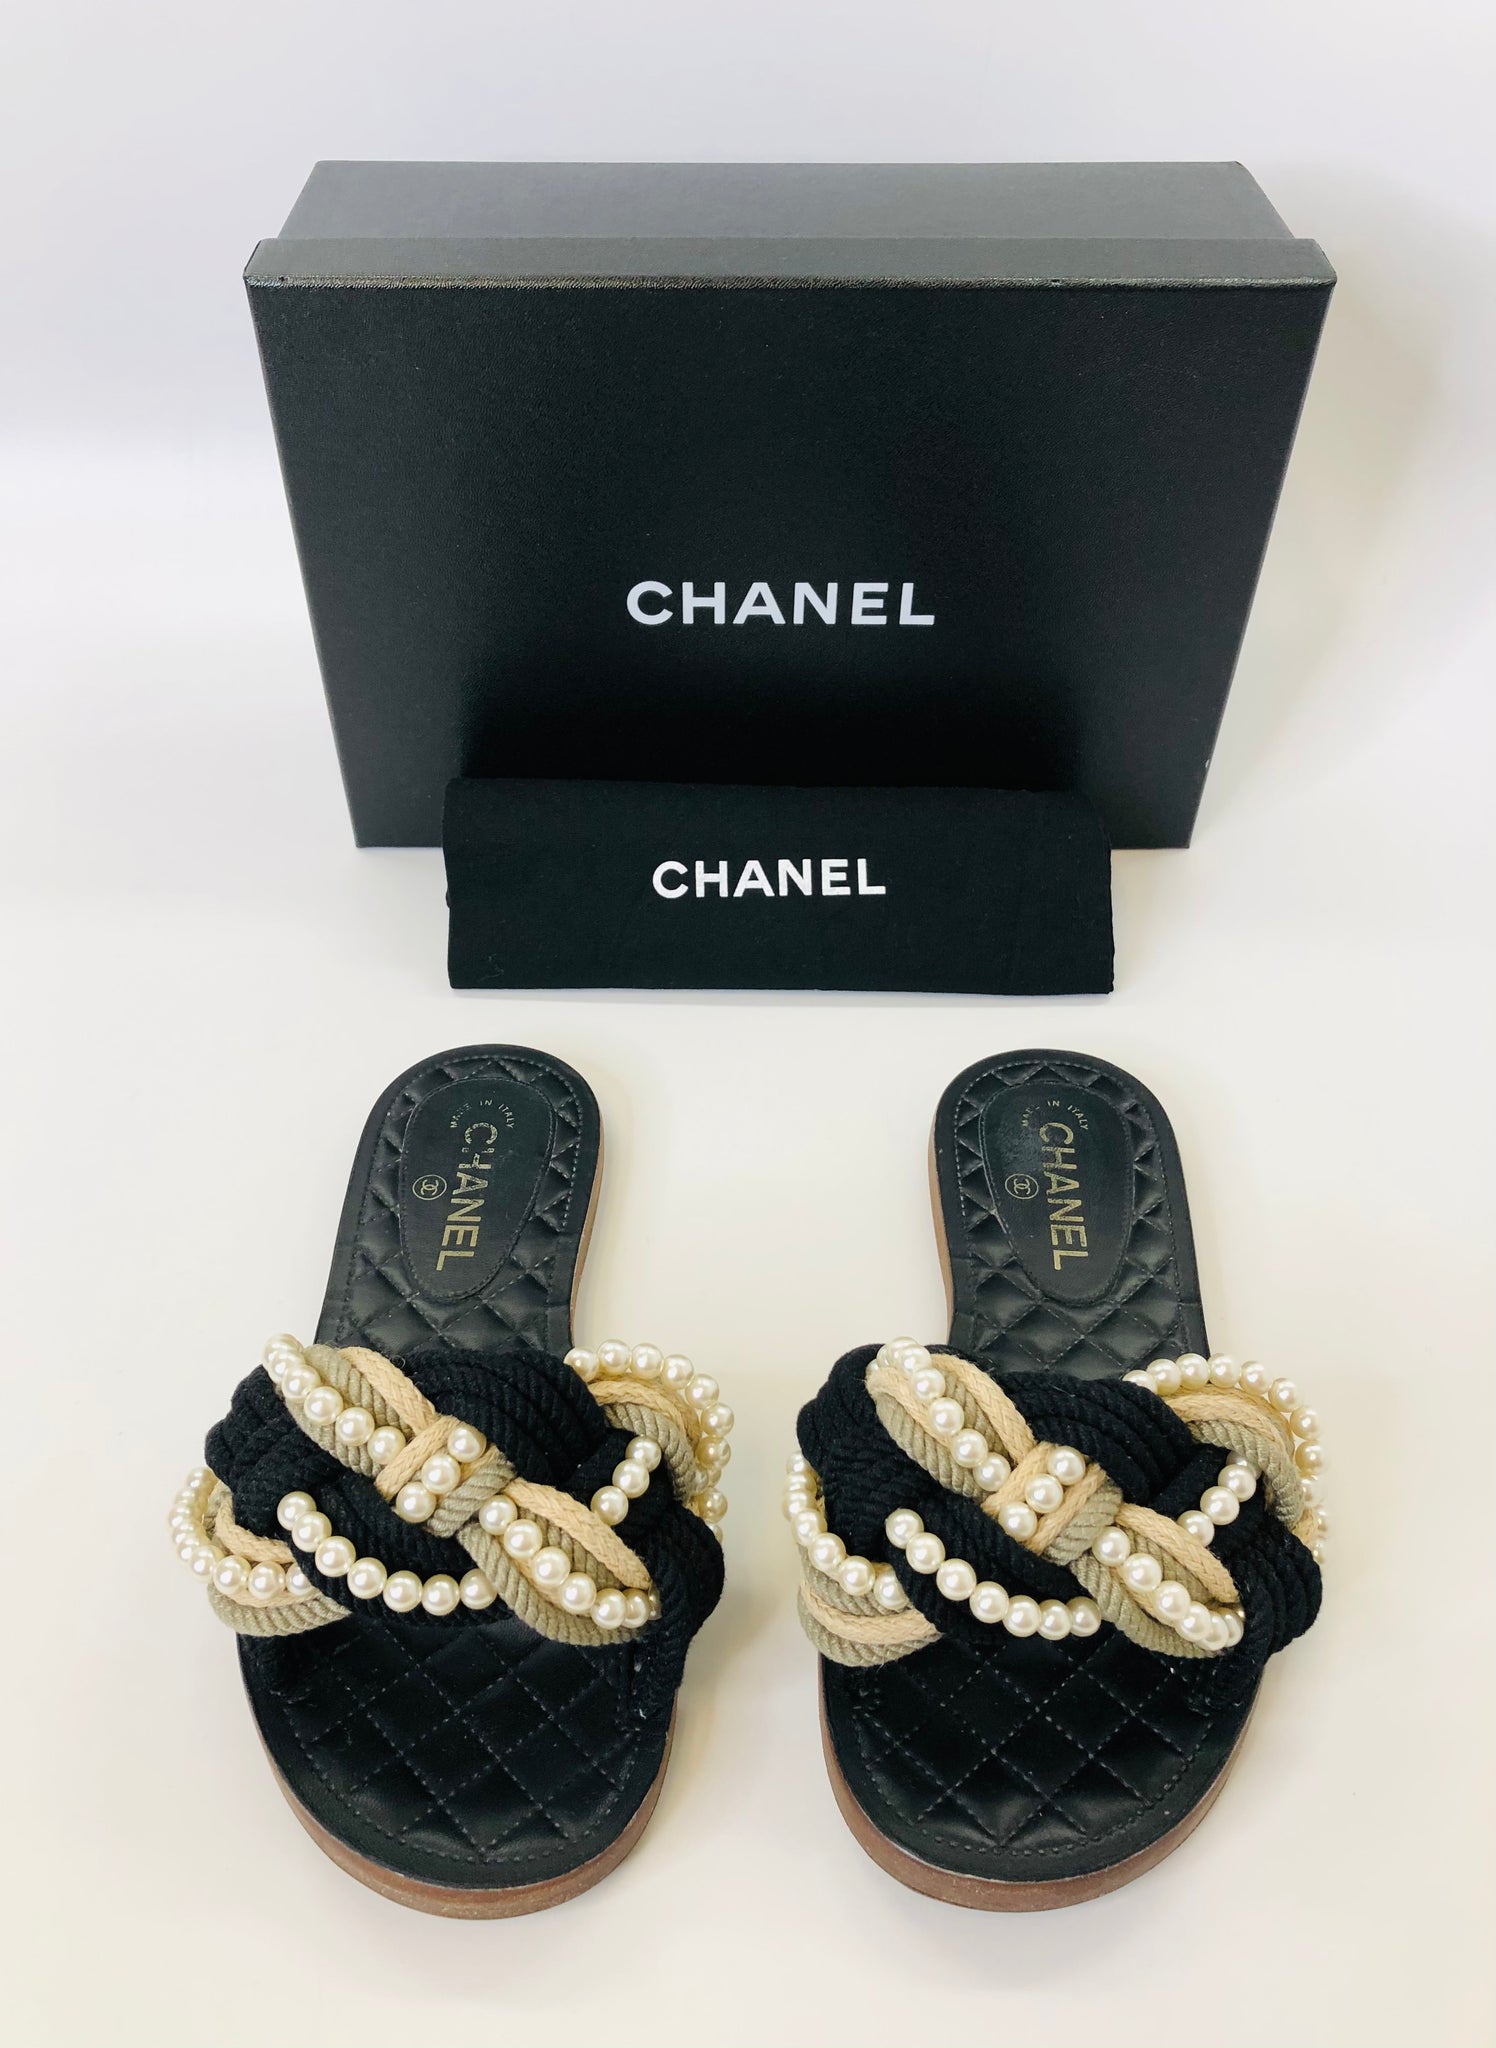 CHANEL Paris Cuba Cruise 2016/17 Runway Pearl and Rope Slides Size